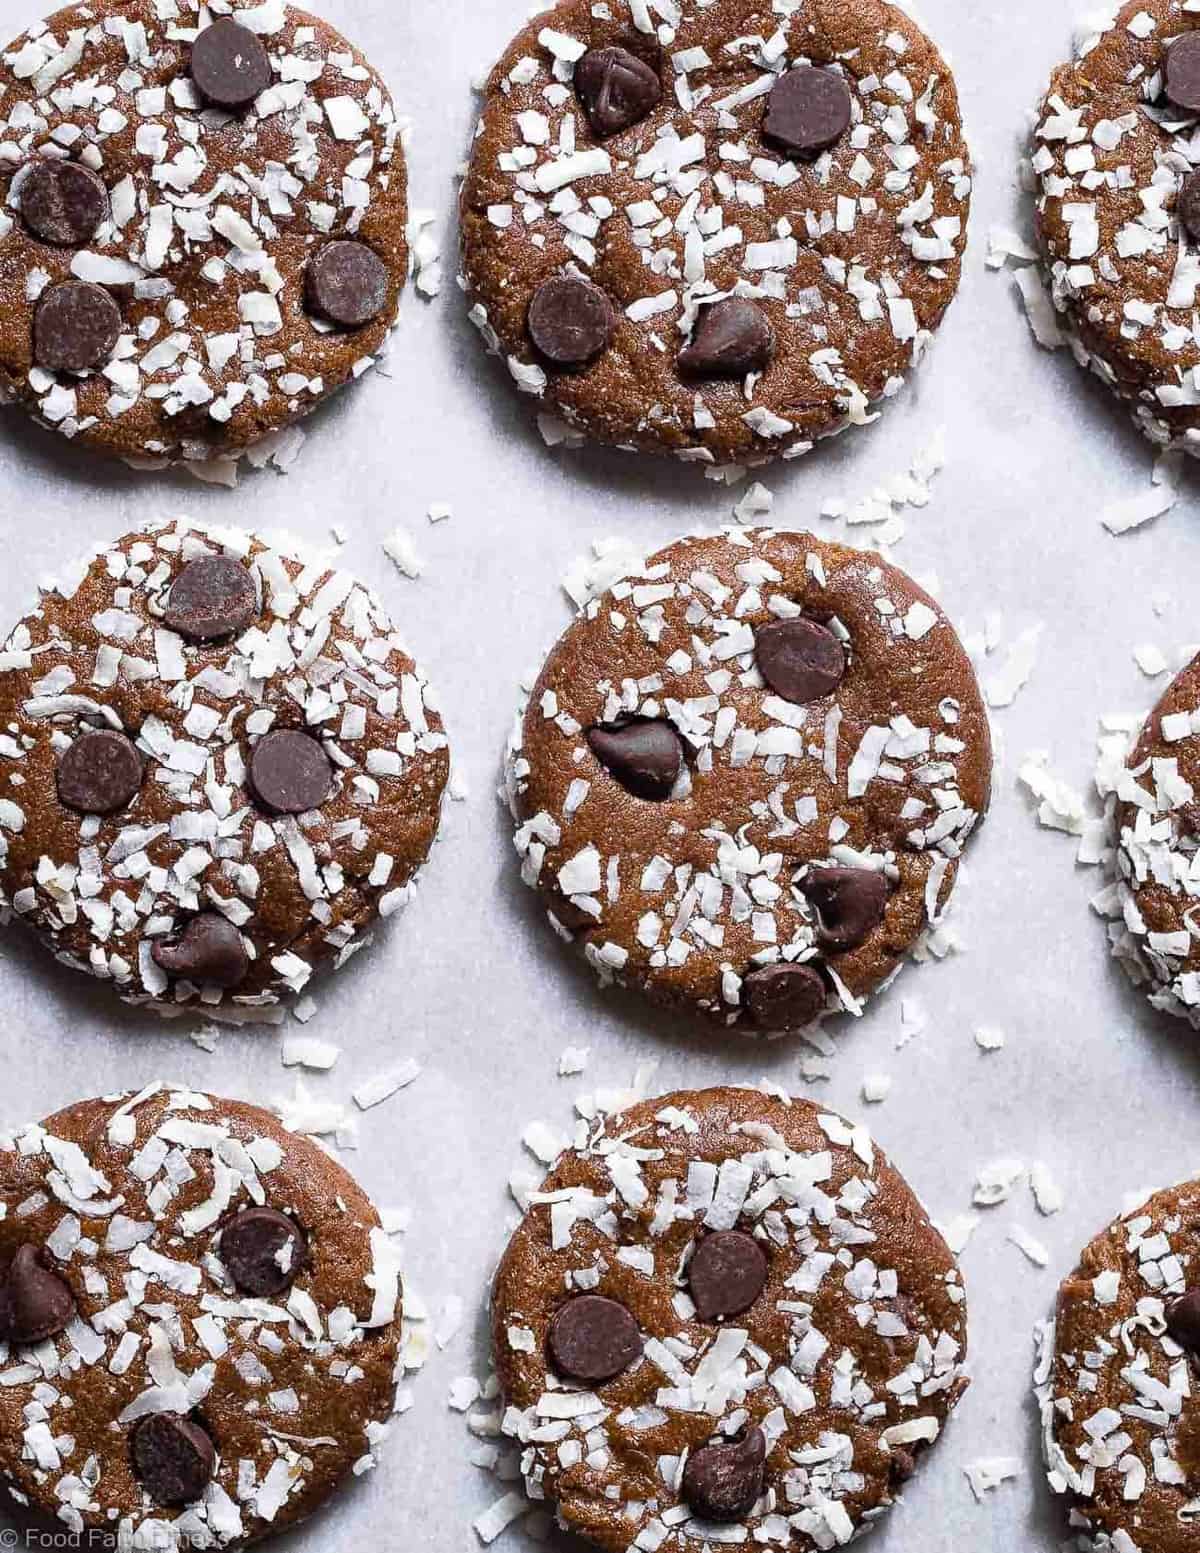 Almond Chocolate Chip Coconut Whey Protein Cookies - This EASY protein cookie recipe use almond butter to make them extra soft and chewy! You will never know these are gluten free, healthy and packed with protein! | #Foodfaithfitness | #Glutenfree #Healthy #Cookies #Coconut #ChocolateChip